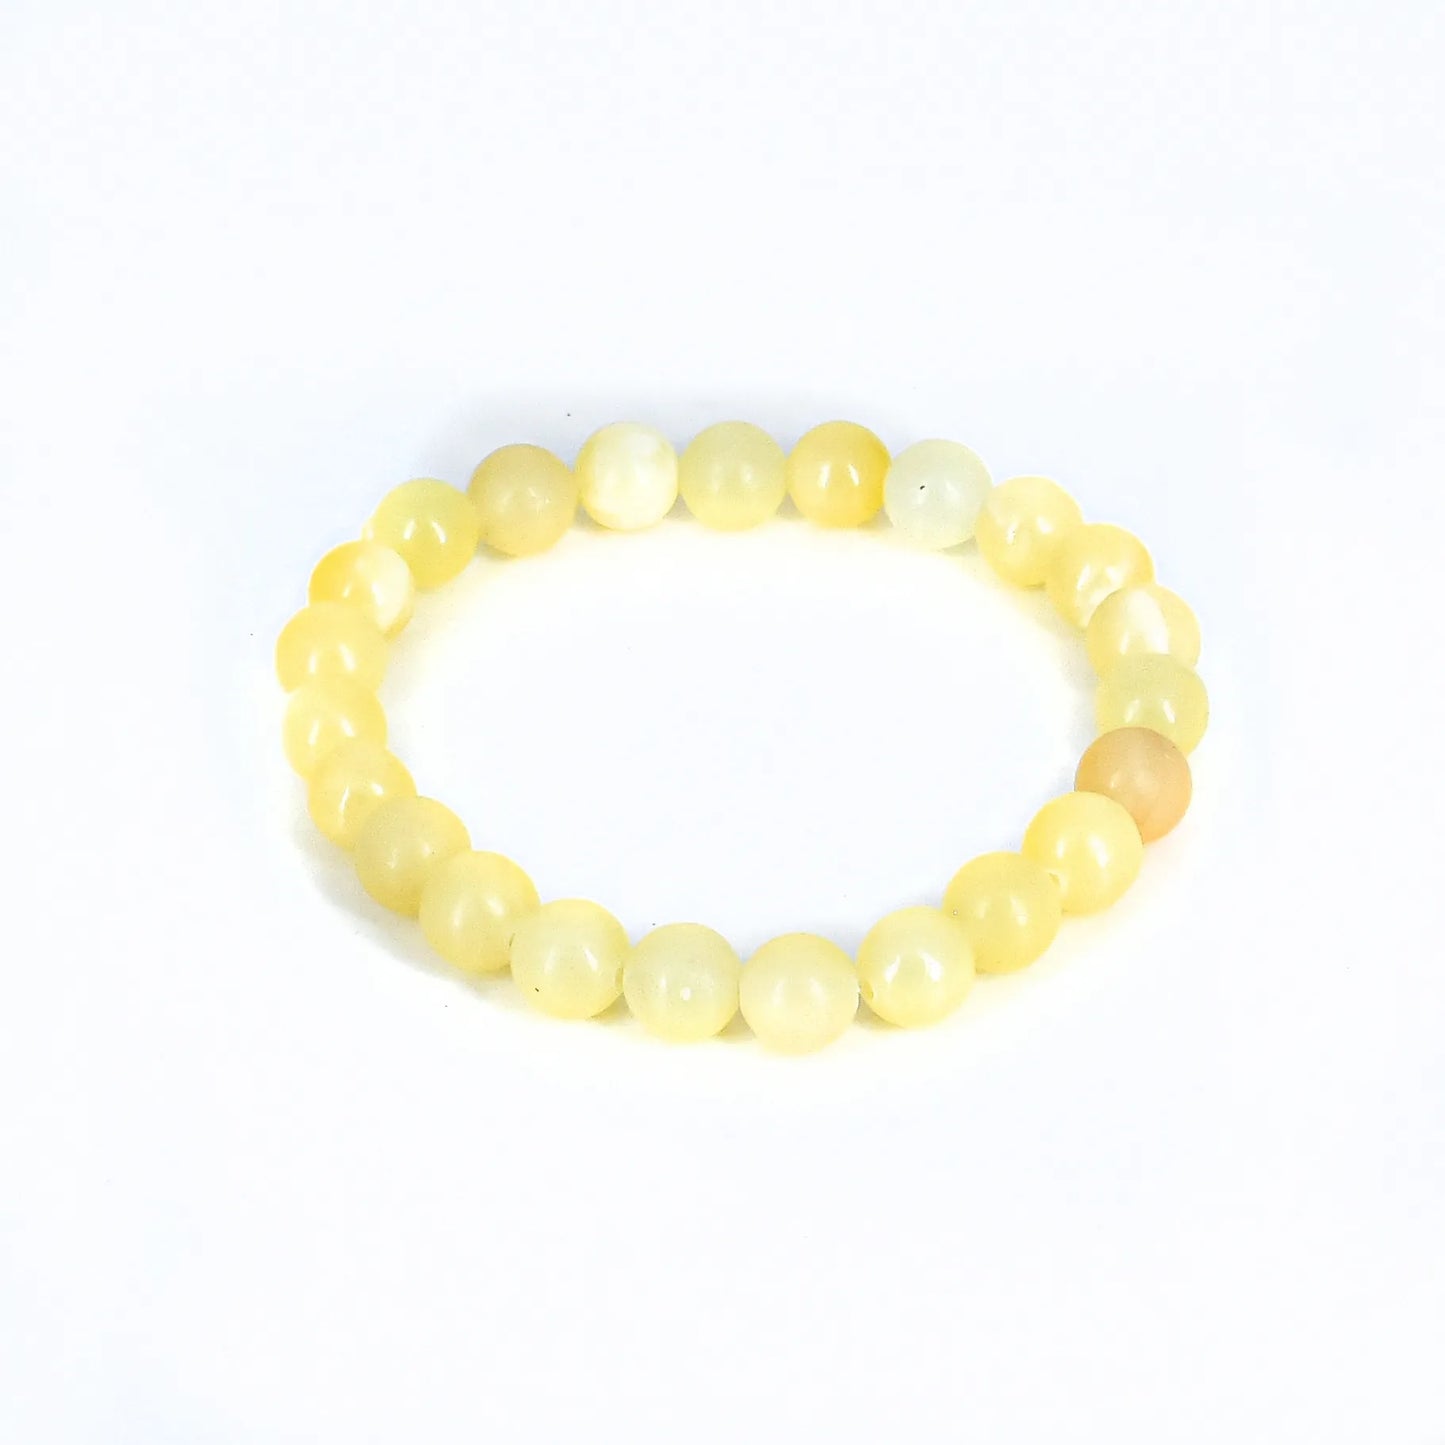 Yellow Calcite Crystal Stone Bracelet for Mental Clarity